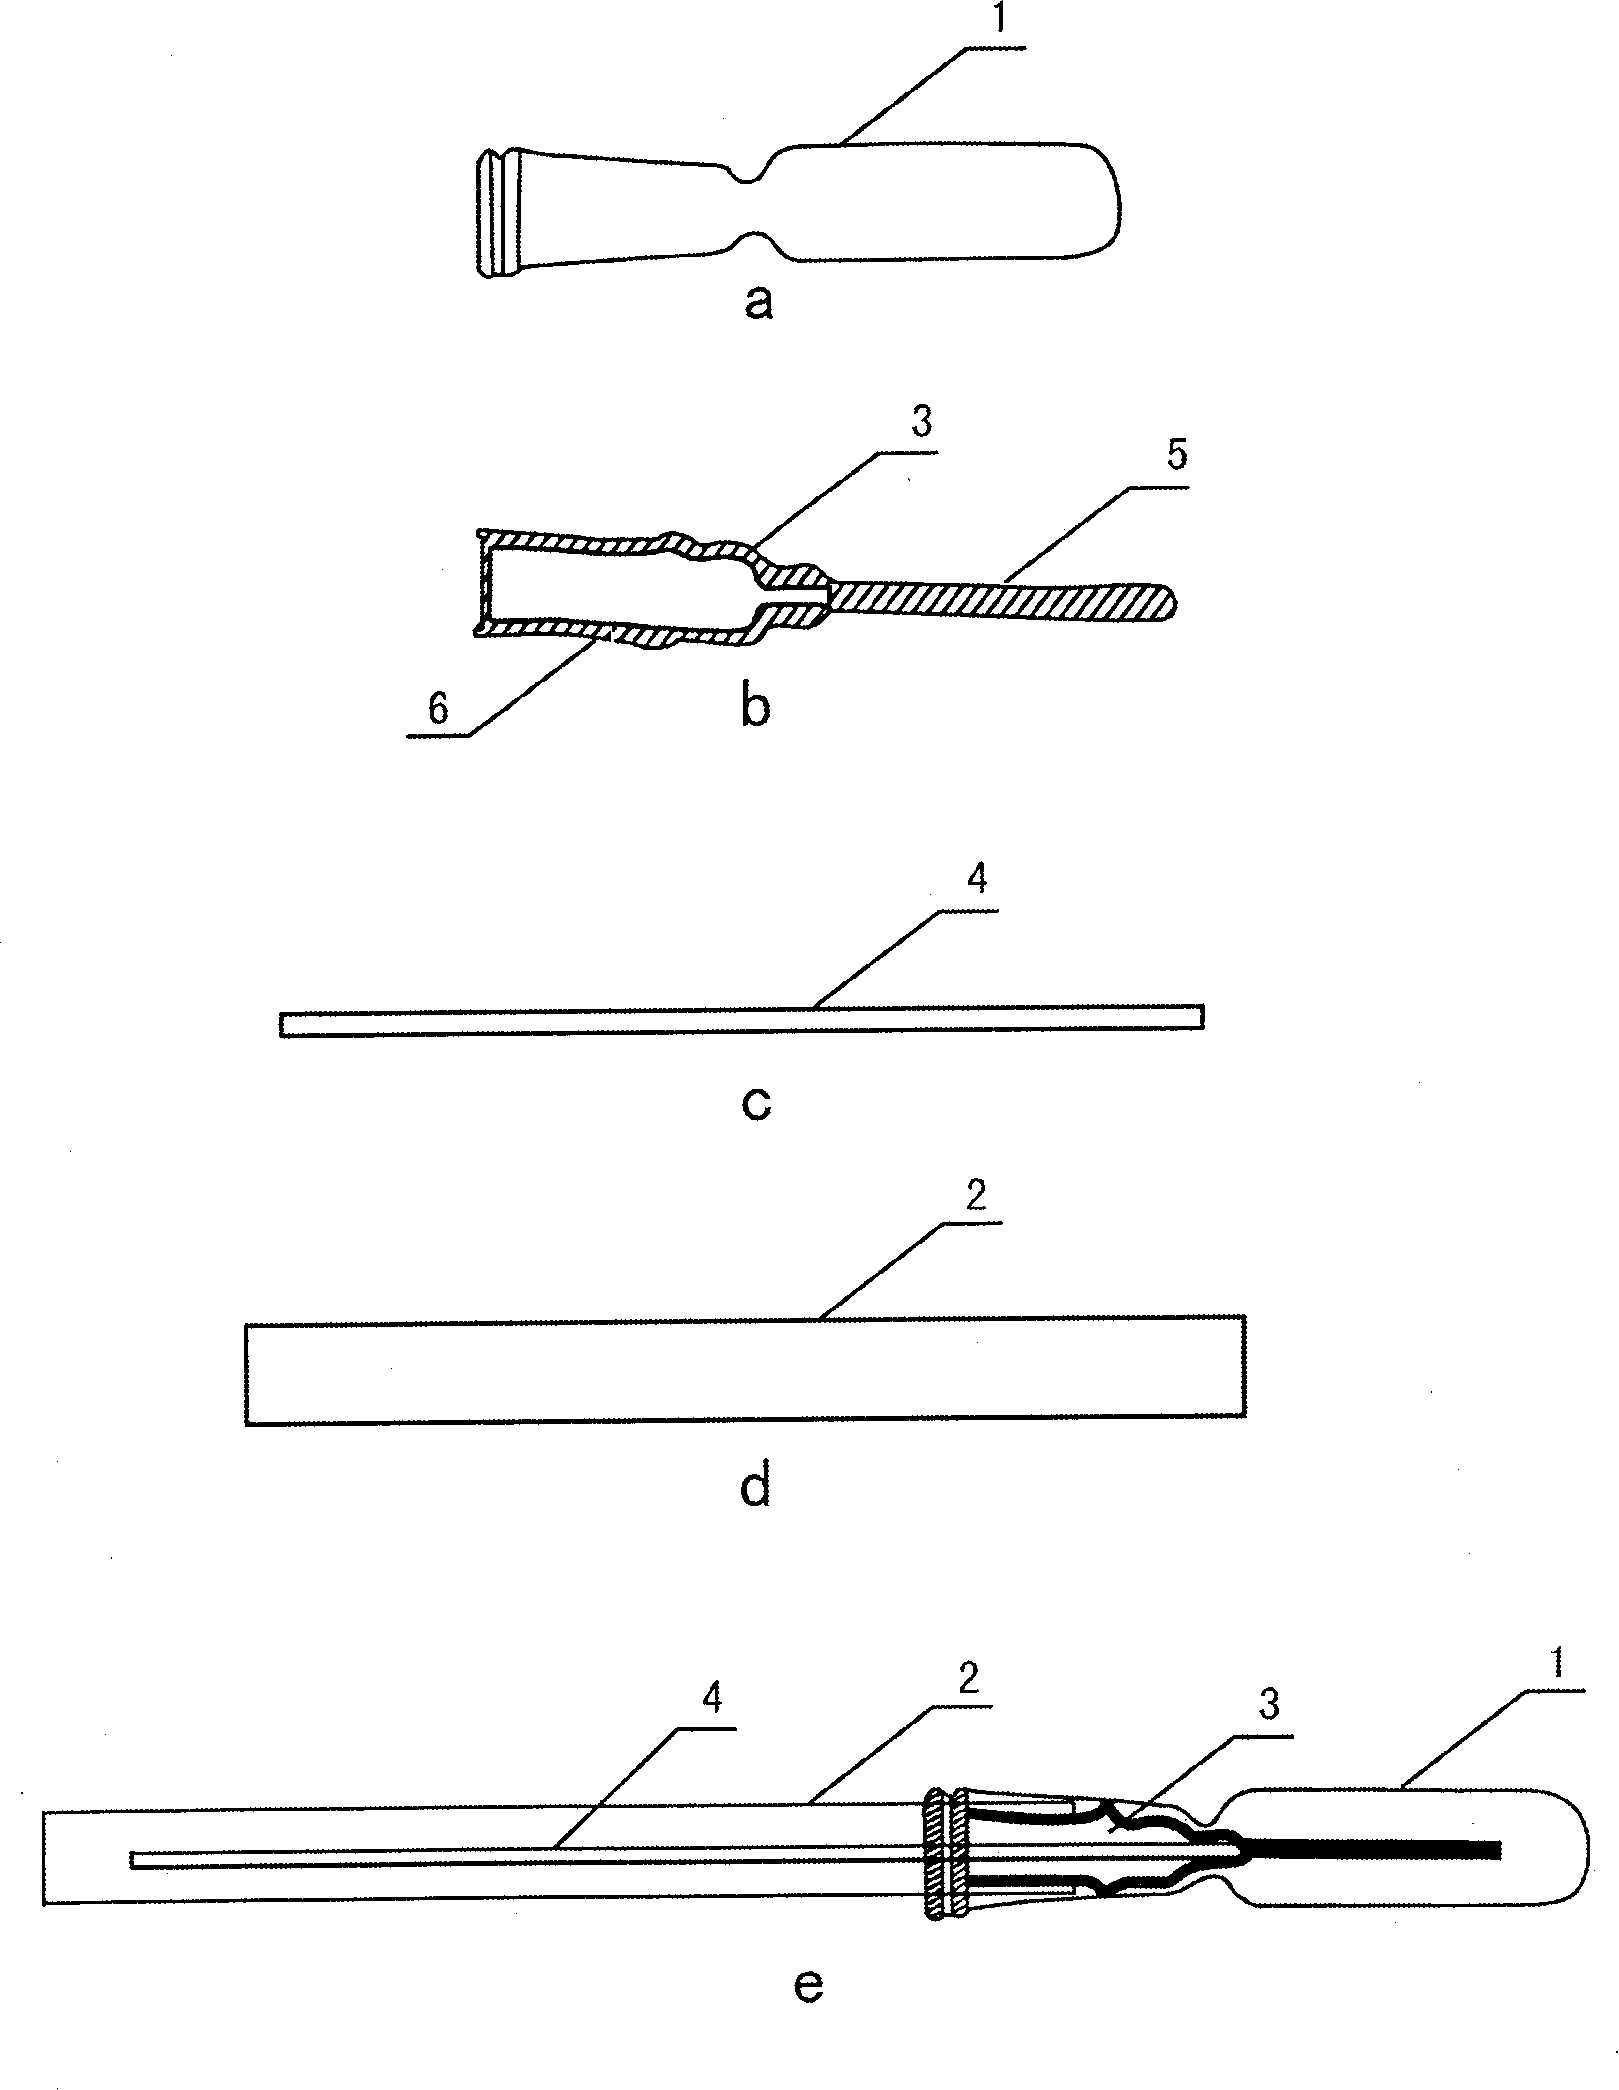 Sample collecting and testing device